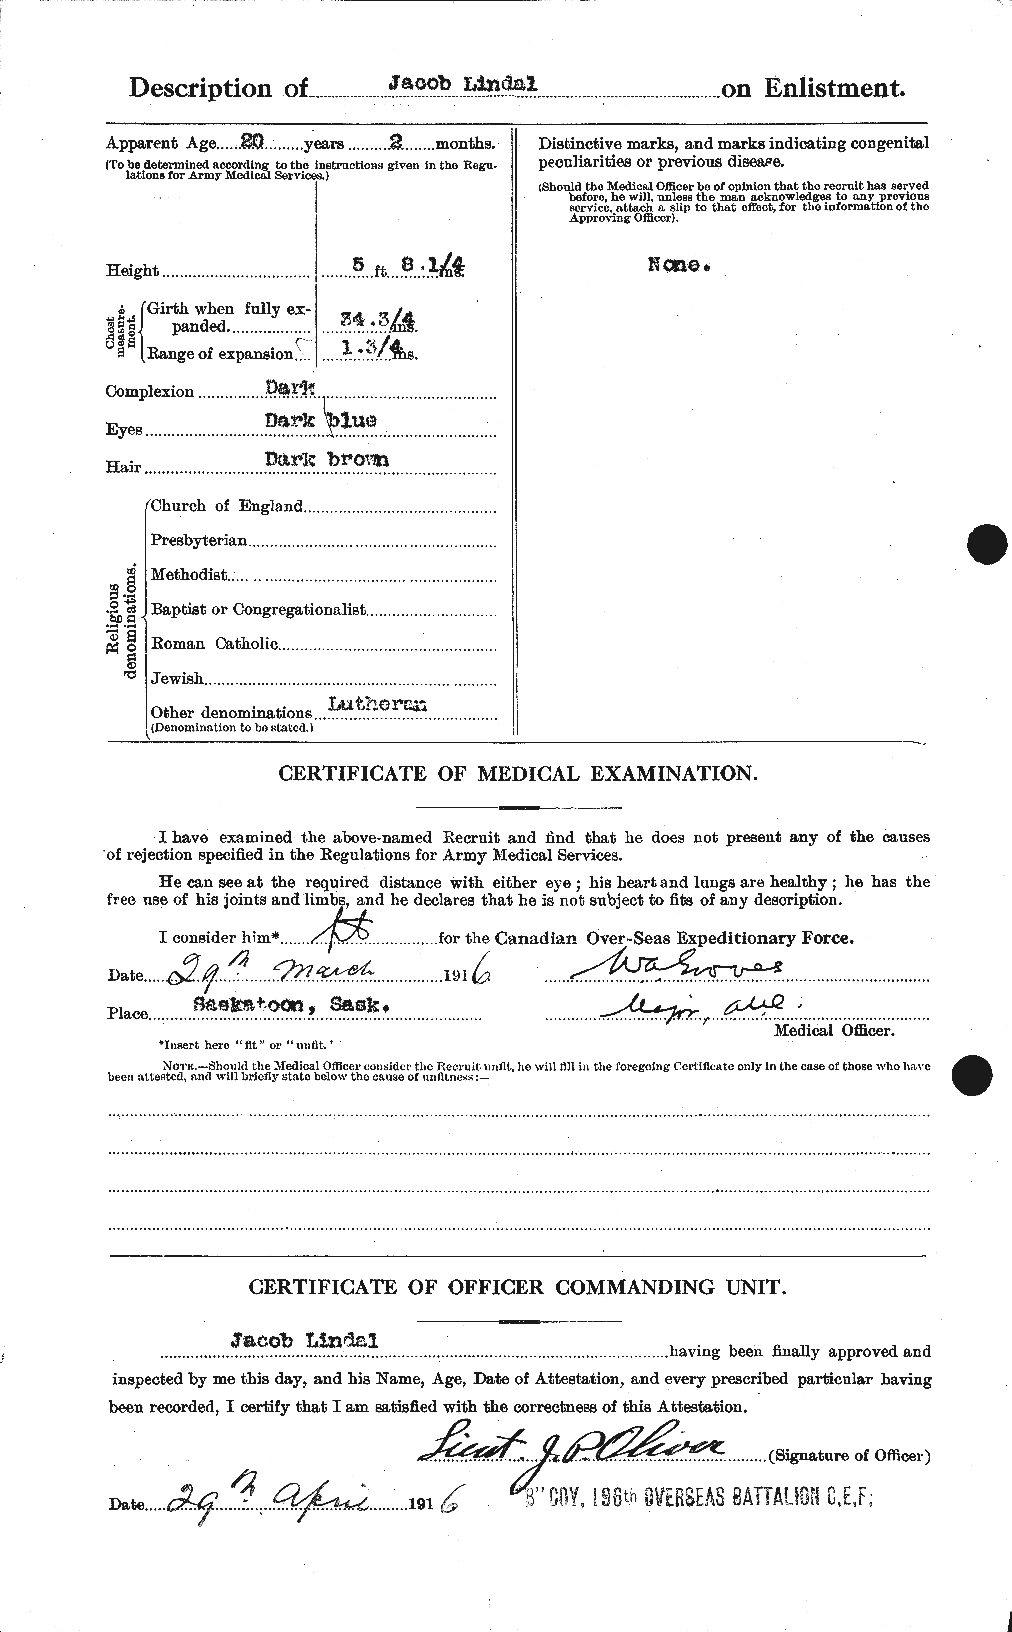 Personnel Records of the First World War - CEF 467643b